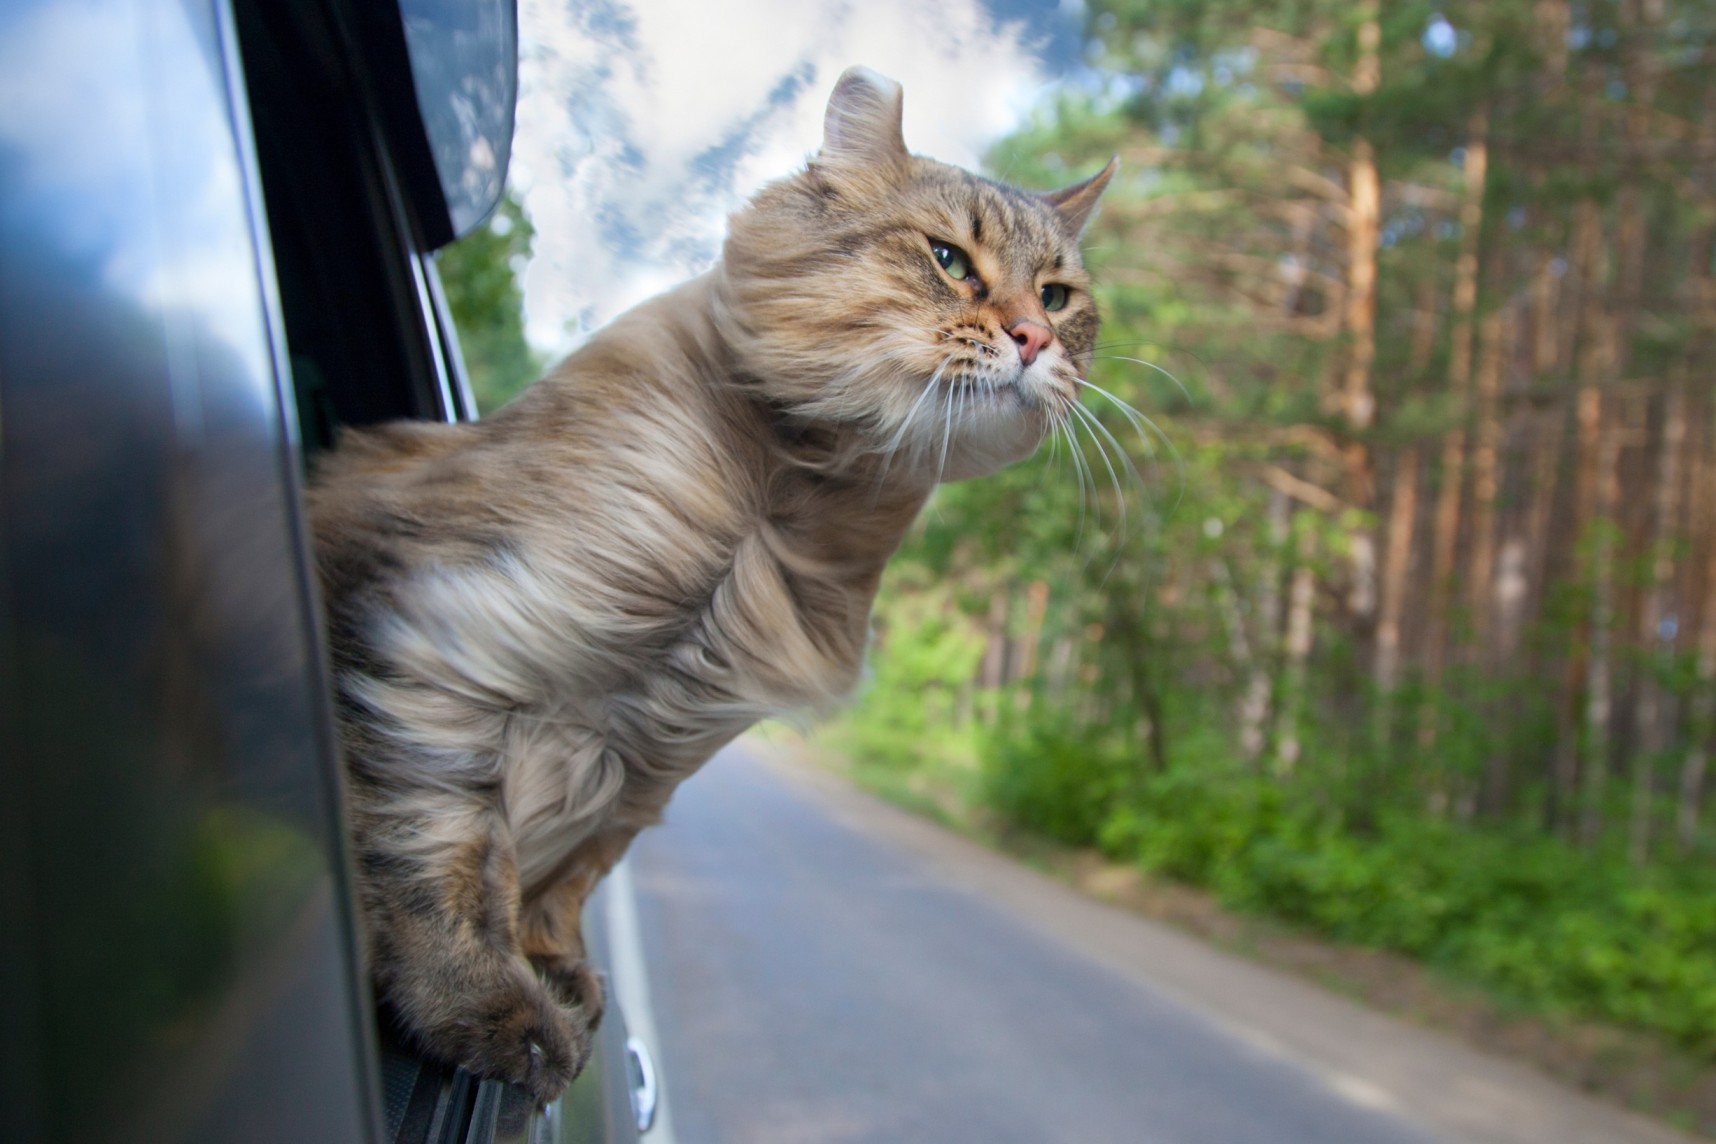 A cat looking out of a car window in motion